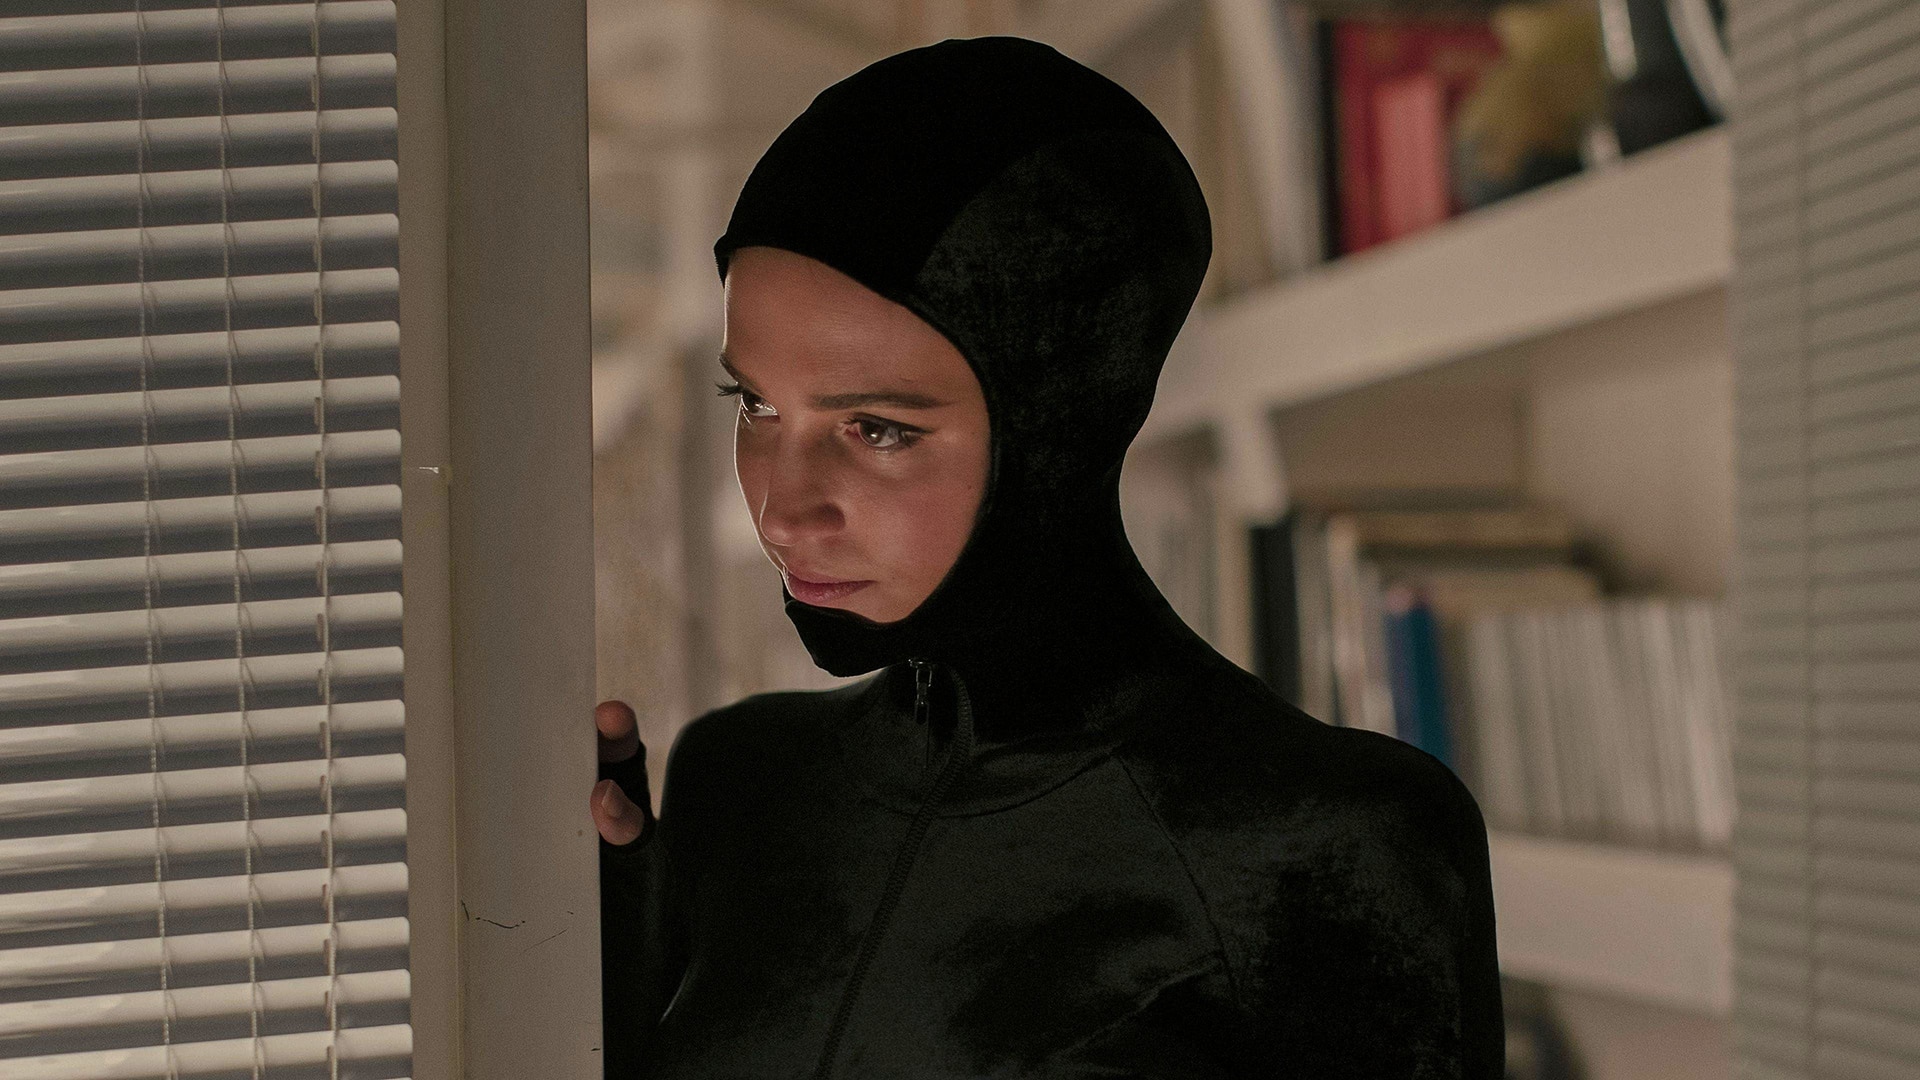 Irma Vep Season 1 Review - An inconsistent and self-indulgent series